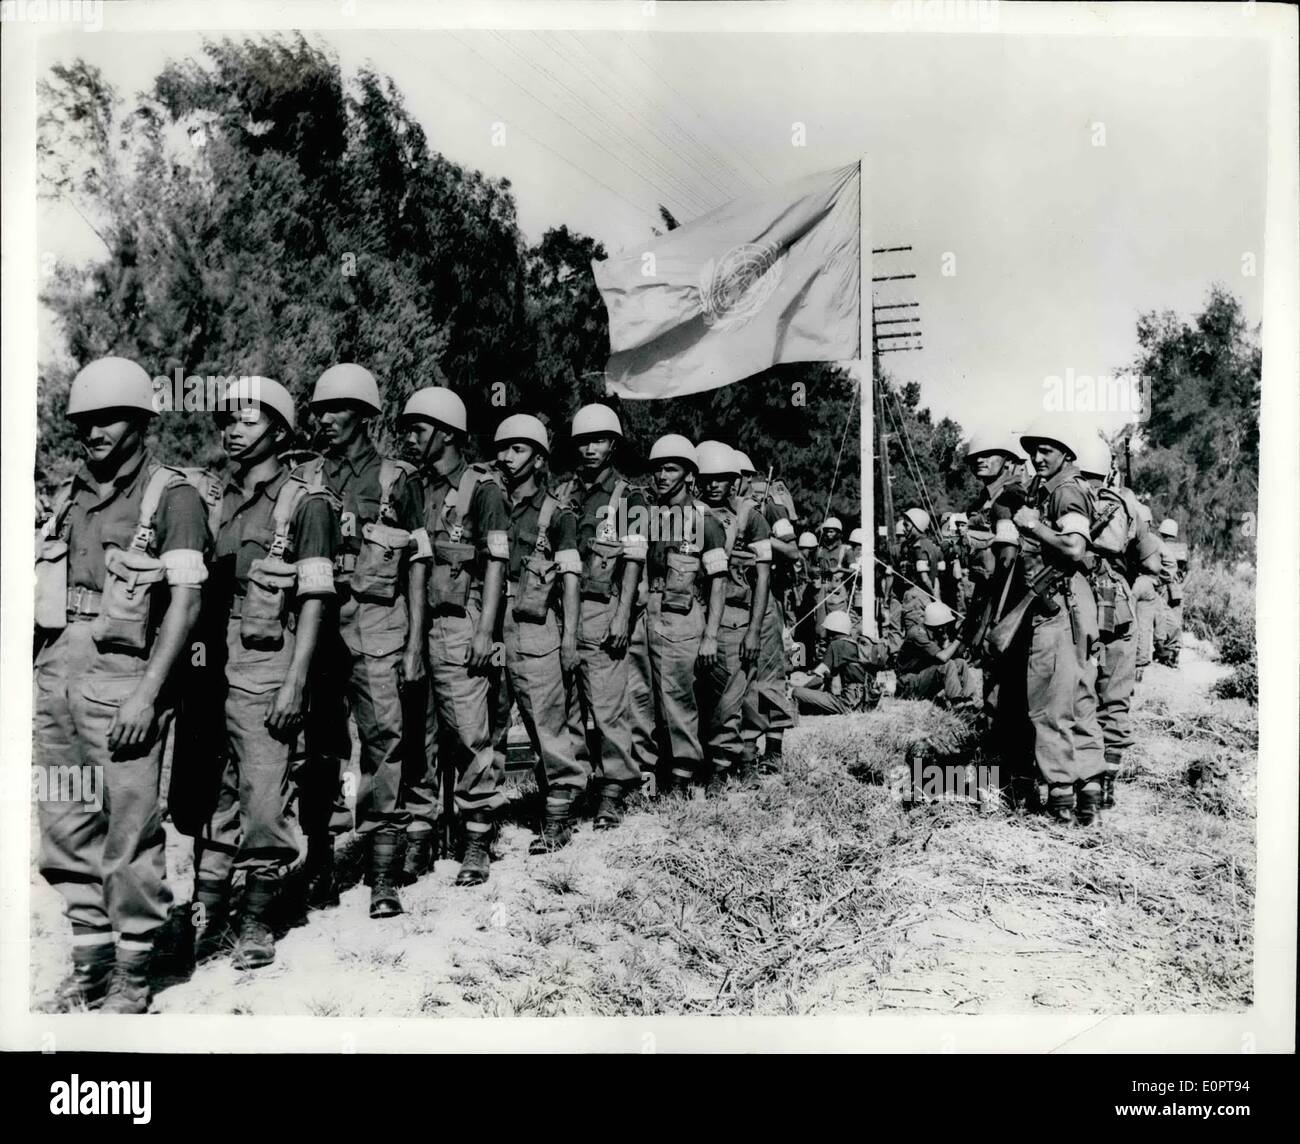 Dec. 12, 1956 - UNO SECURITY FORCE IN EGYPT. The United Nations Security Force, which is taking over from British, French and Israeli troops in the Suez Canal area, is gradually being built up With the arrival in Egypt of further contingente from the many contributing nations. PHOTO SHOWS: Indian paratroops seen forming up in front of the United Nations flag ae they prepare to take over position. In the ml Cap (Port Said) area, upon their arrival as part of the U.N.O. Security Force. Stock Photo